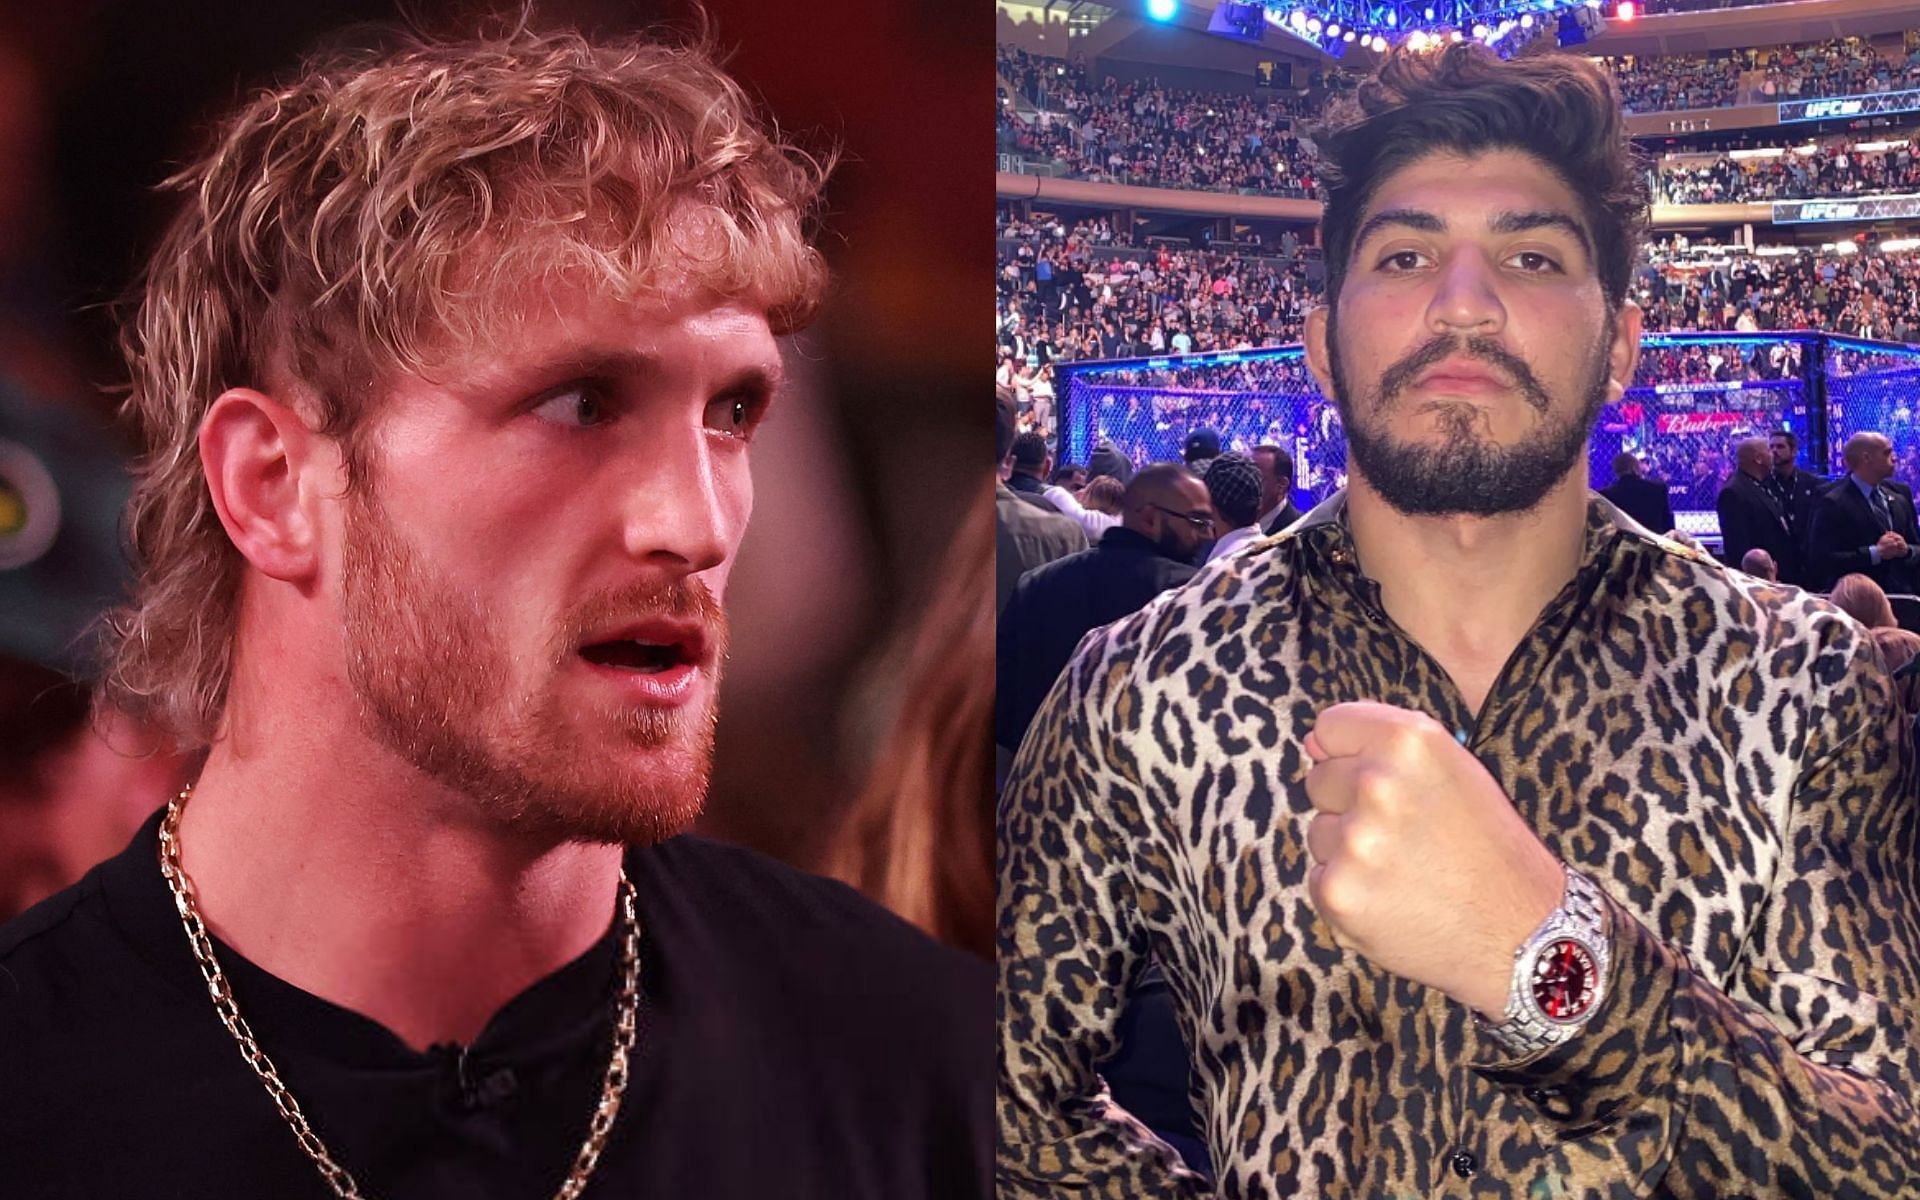 Logan Paul (left) and Dillon Danis (right) [Images Courtesy: @GettyImages and @dillondanis on Instagram]